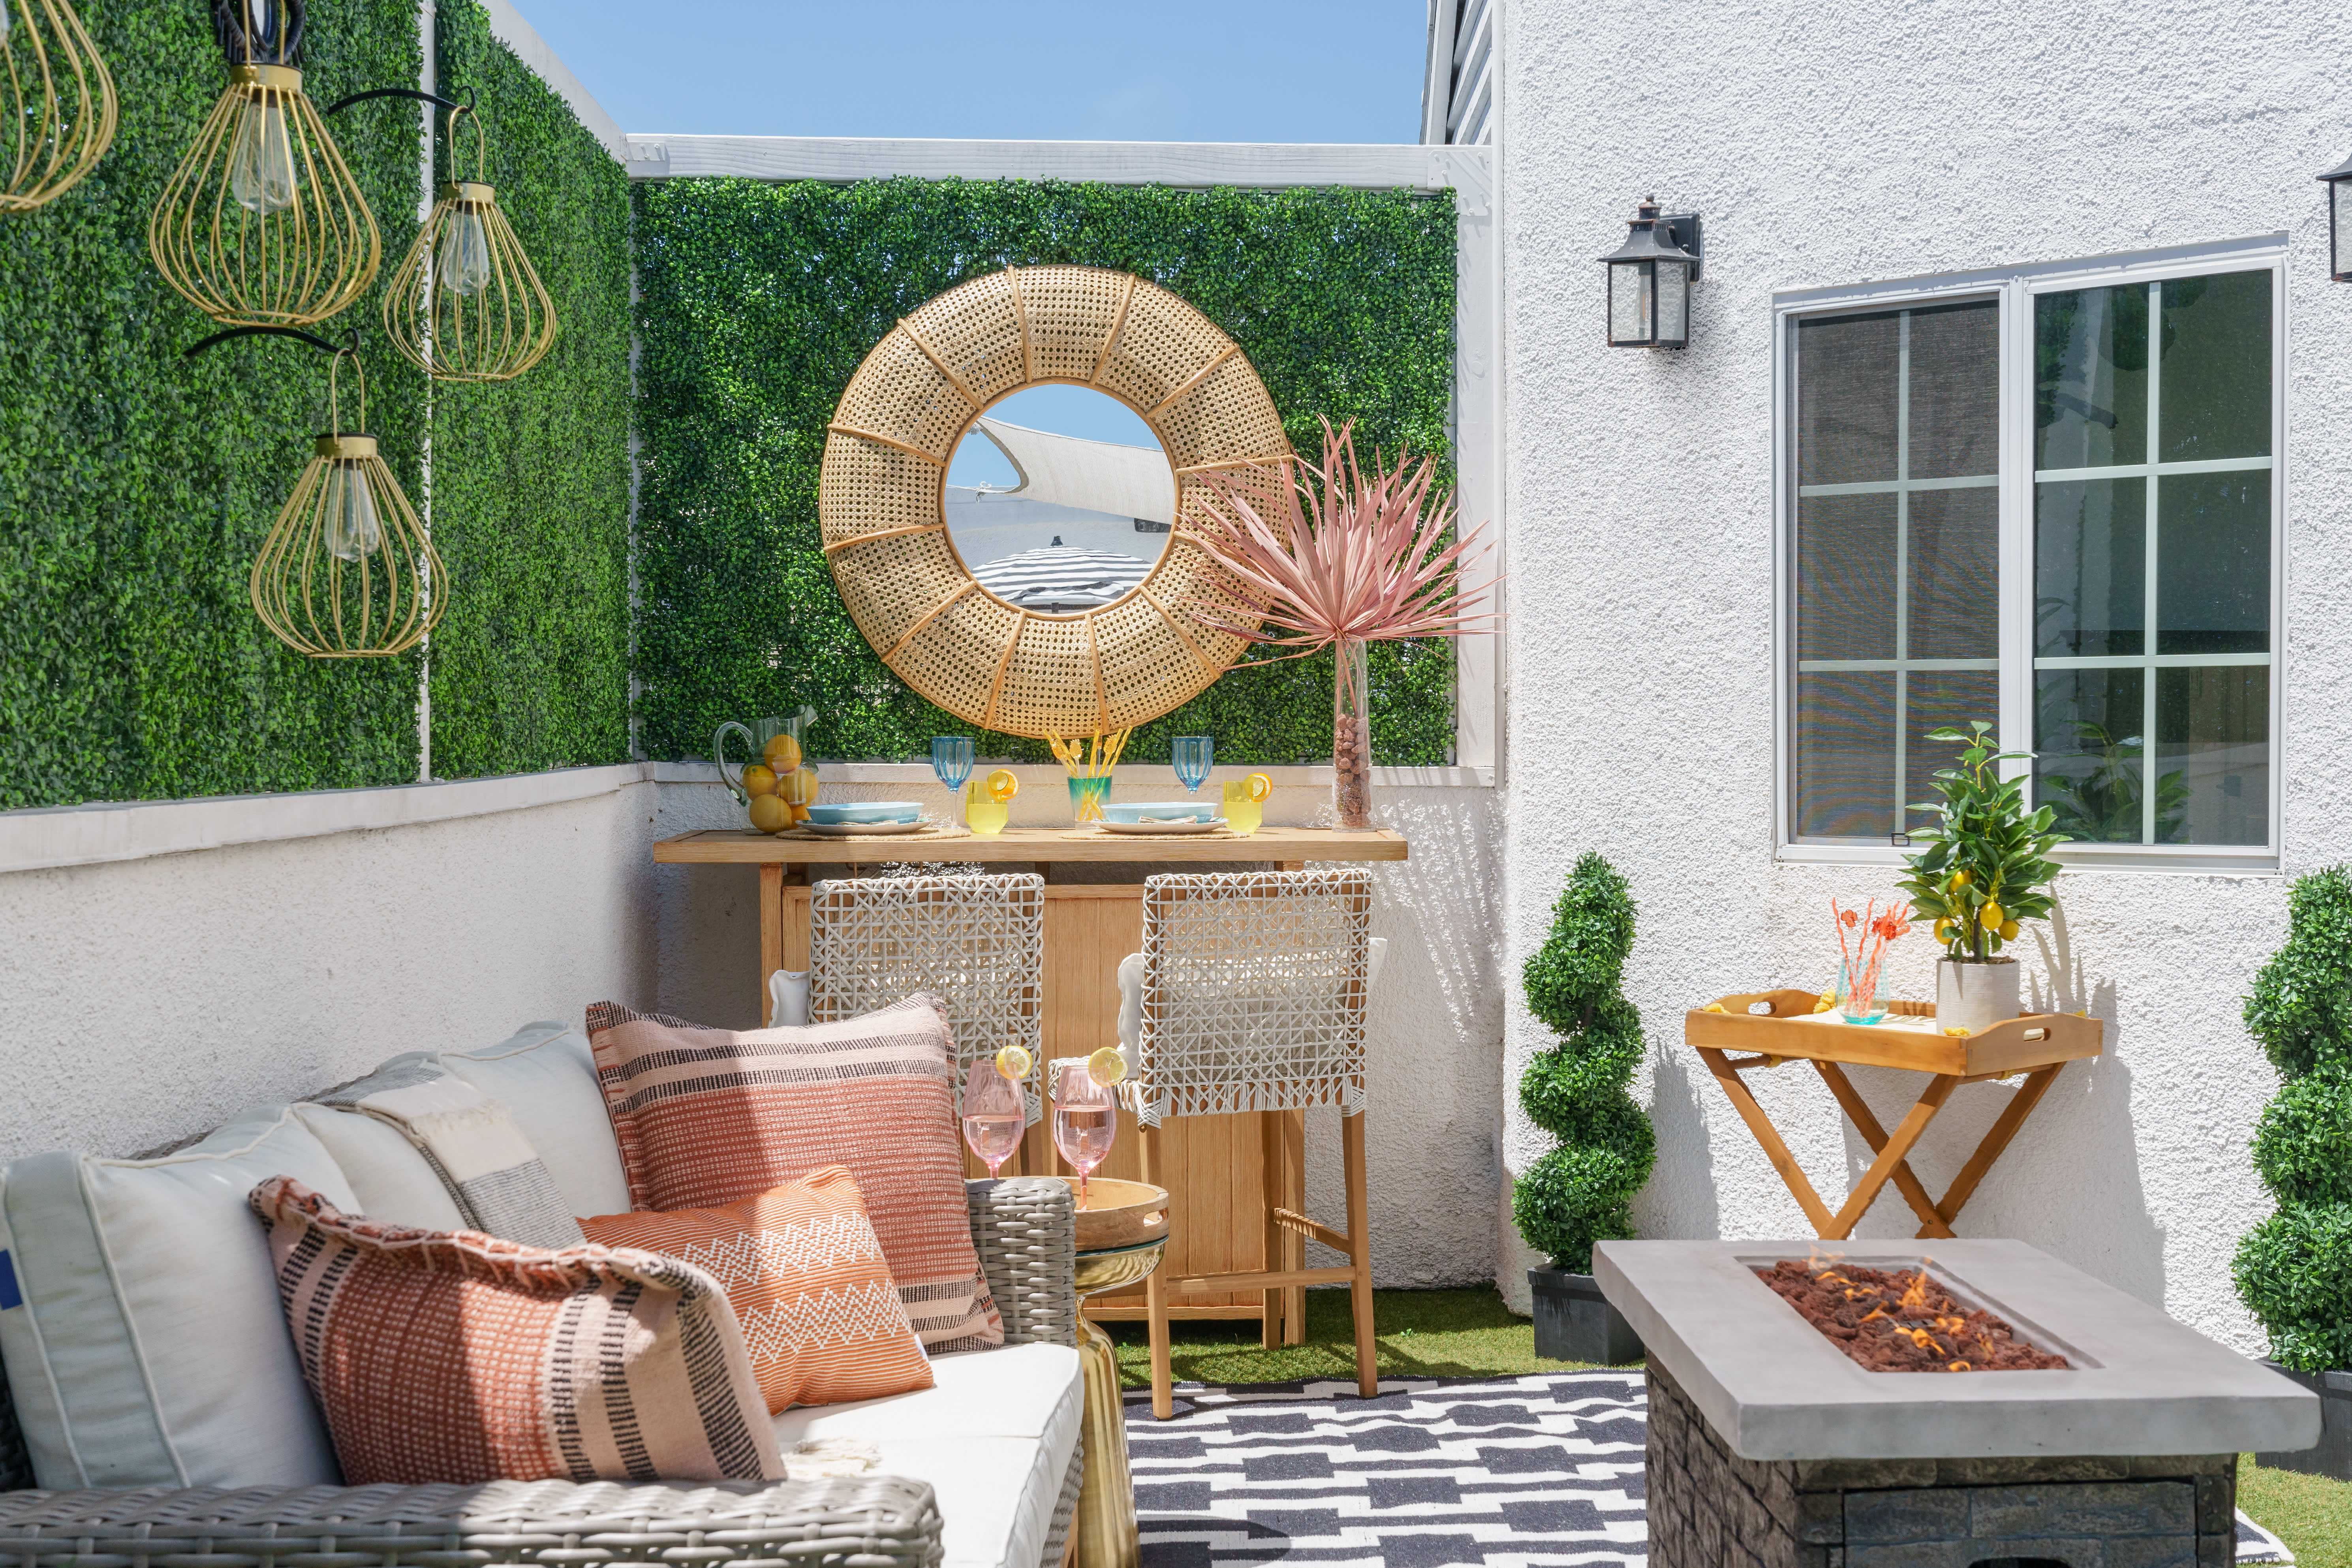 45 Backyard Decor Ideas to Spruce Up Your Outdoor Space